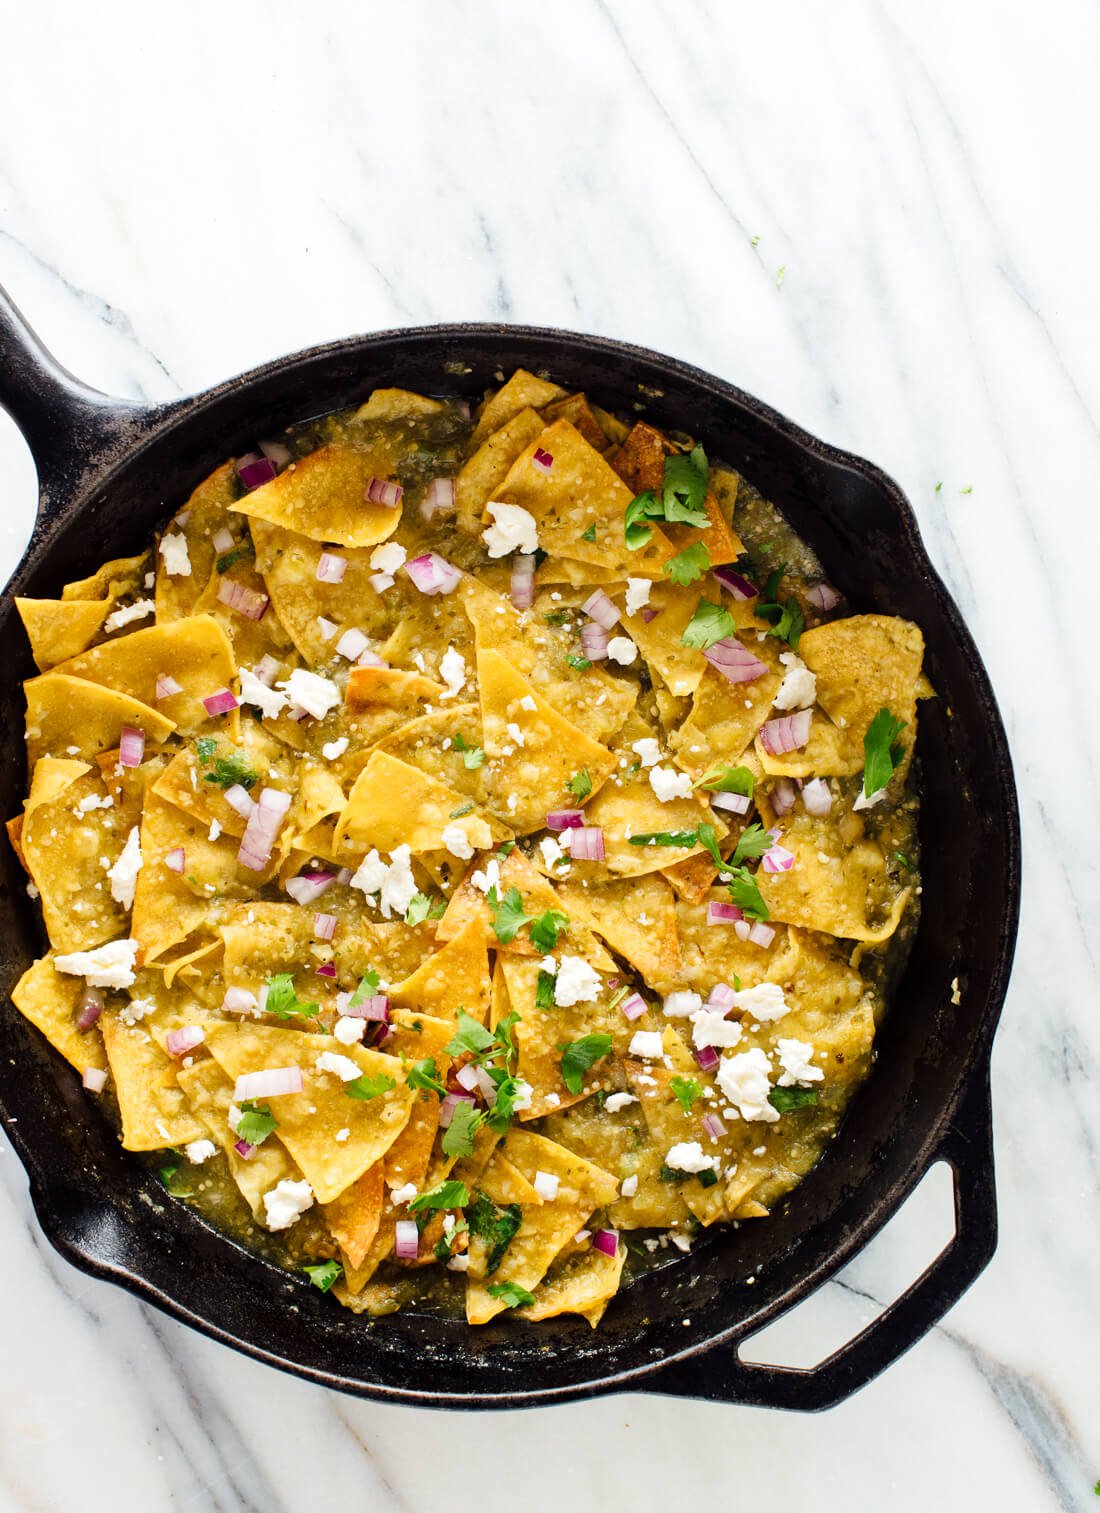 Homemade chilaquiles verdes with baked tortilla chips! Get the recipe at cookieandkate.com